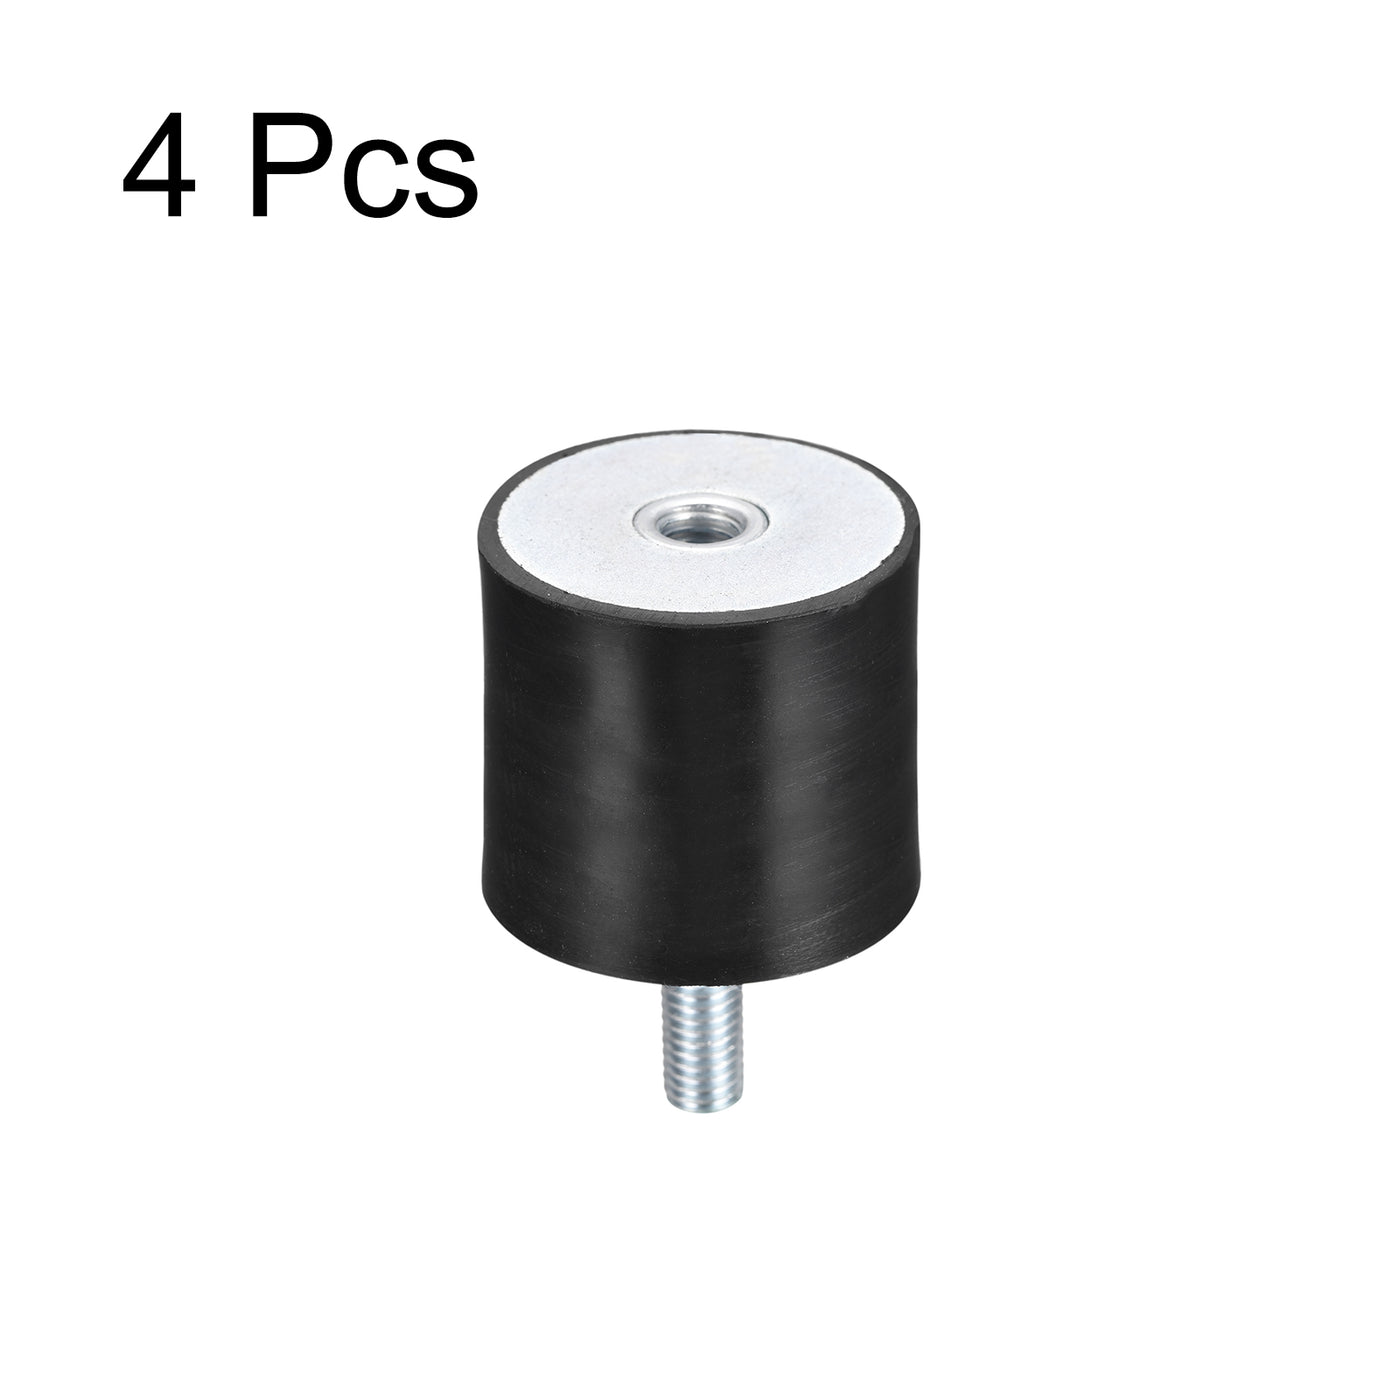 uxcell Uxcell Rubber Mount 4pcs M8 Male/Female Vibration Isolator Shock Absorber, D40mmxH40mm